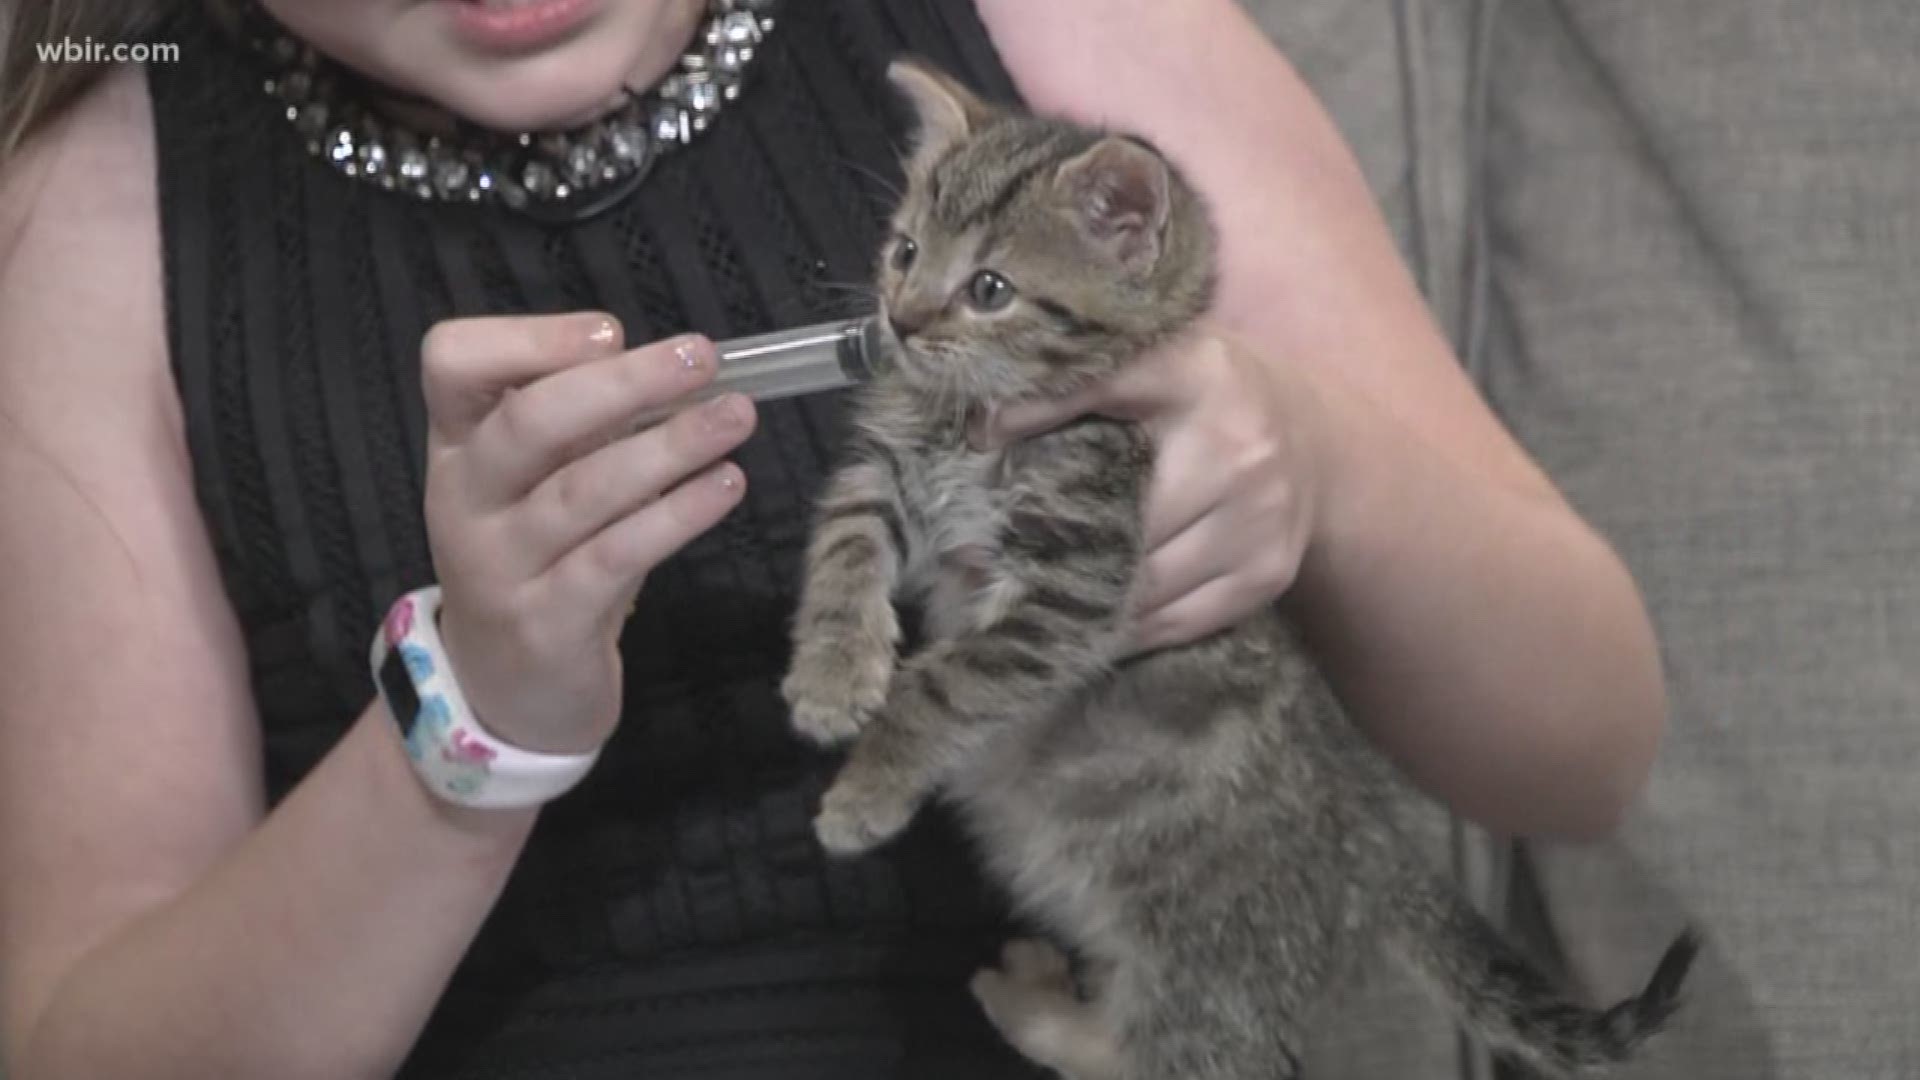 Junior Anchor Alayla helped raise an orphaned kitten. Here she shares some ways she fed the kitten to get him healthier and stronger.
Oct. 23, 2018-4pm